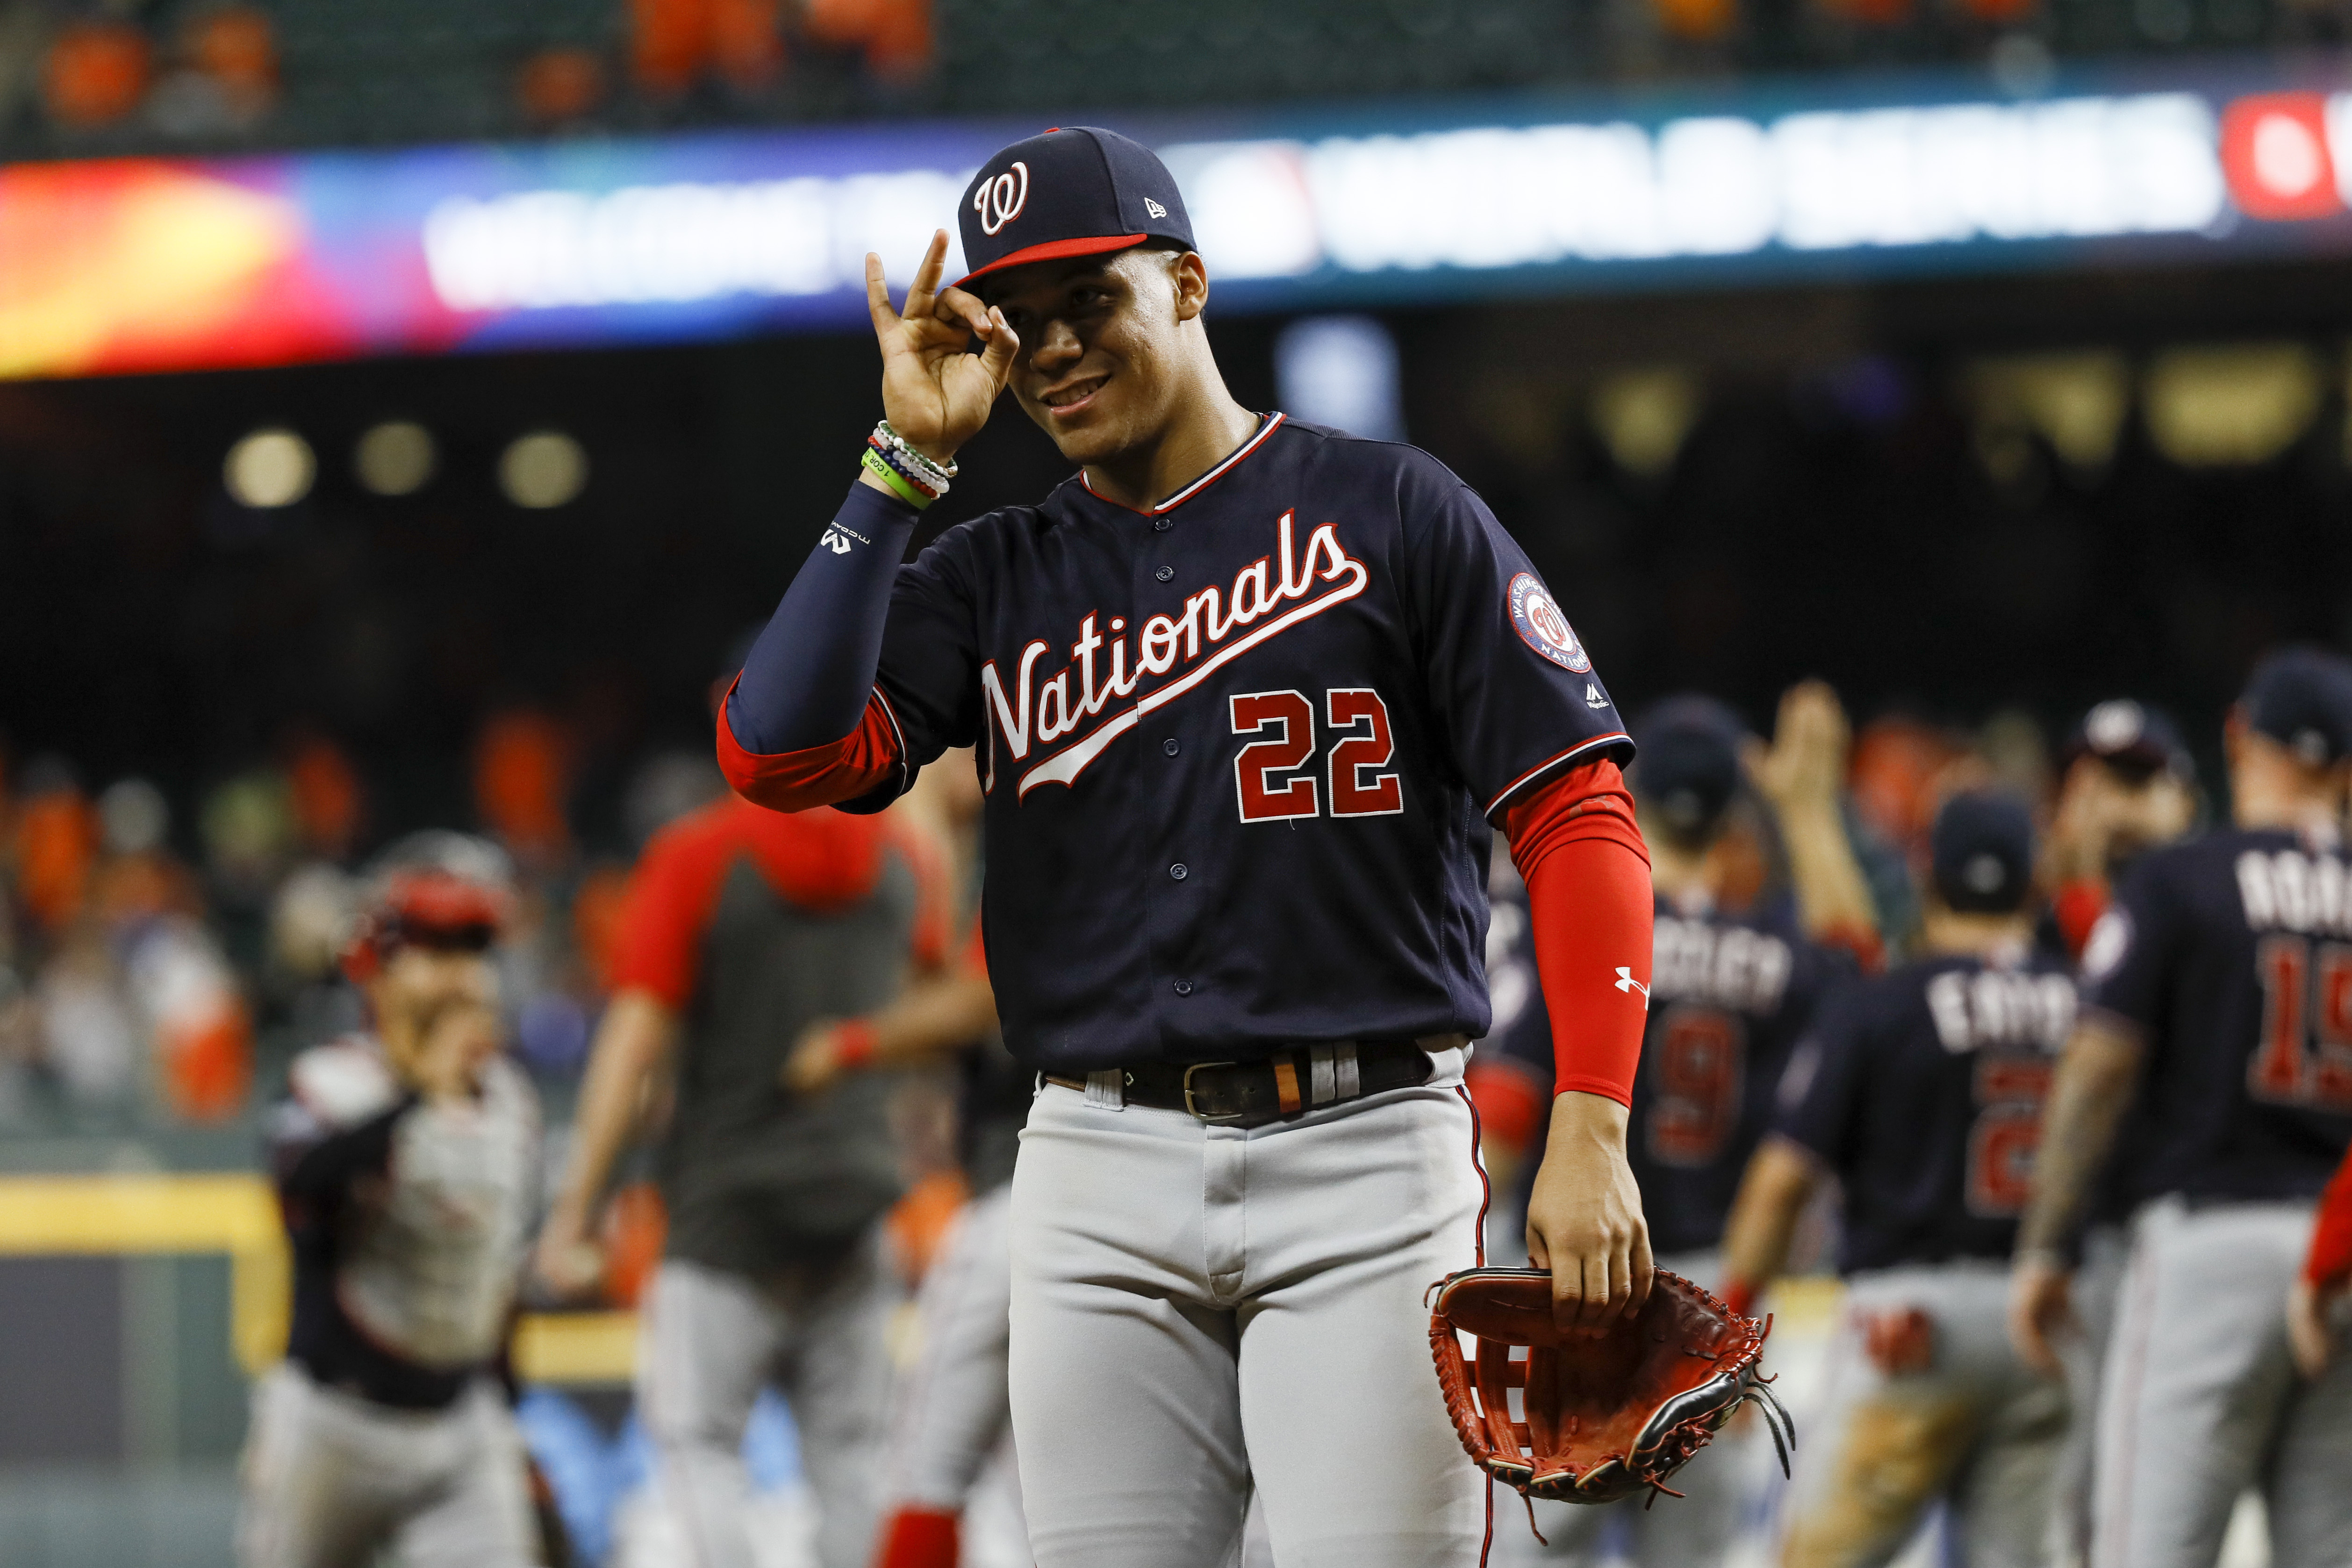 Nats lead Astros 2-0 as World Series finally returns to DC